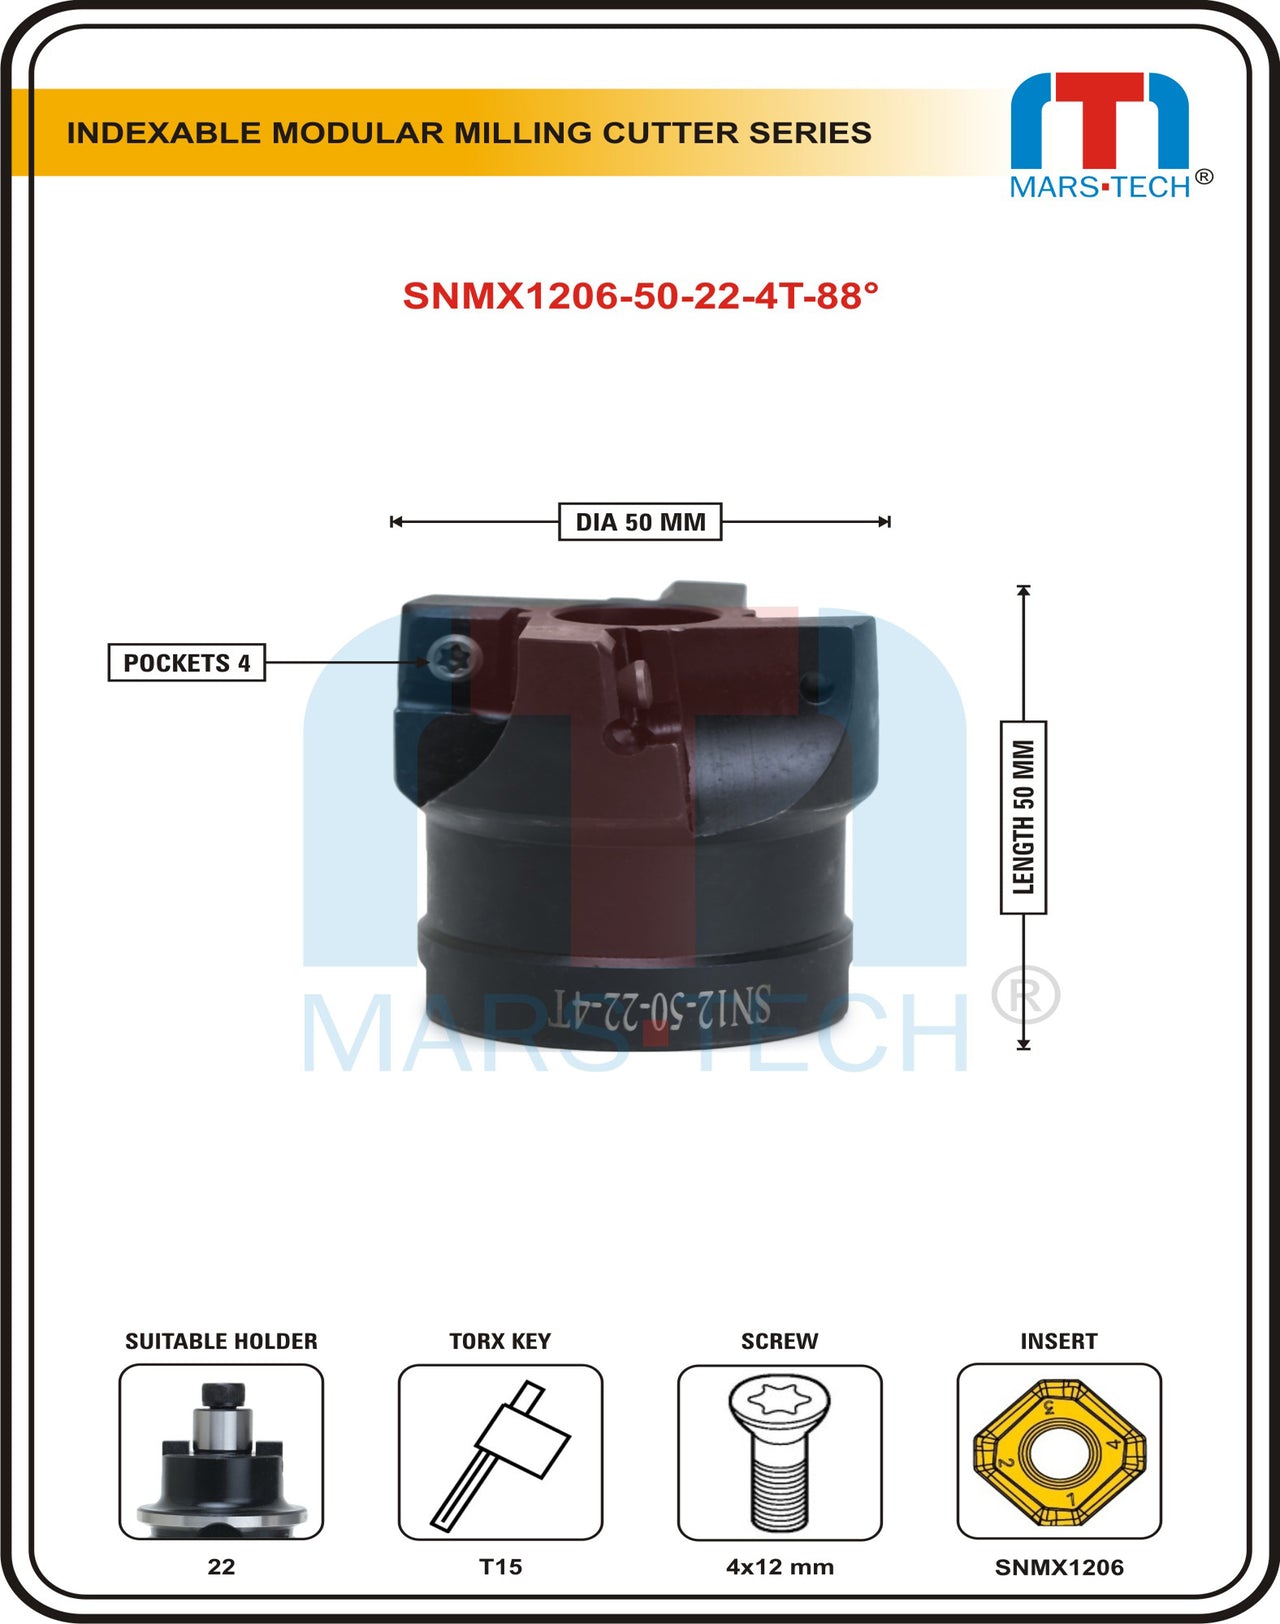 SNMX1206 insert facemill